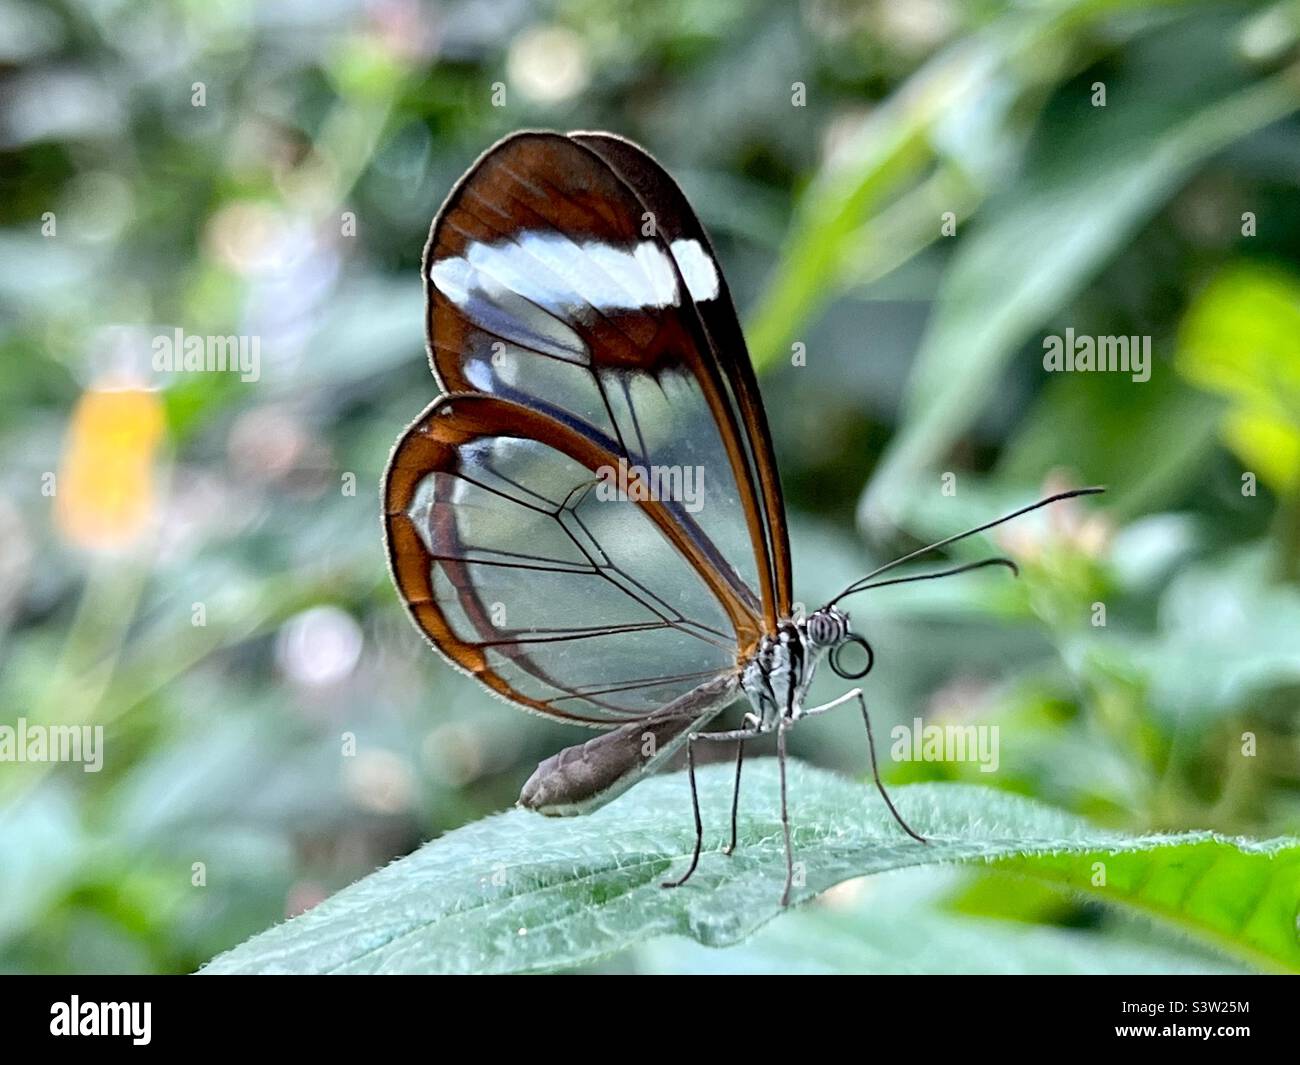 Glass wing butterfly Stock Photo